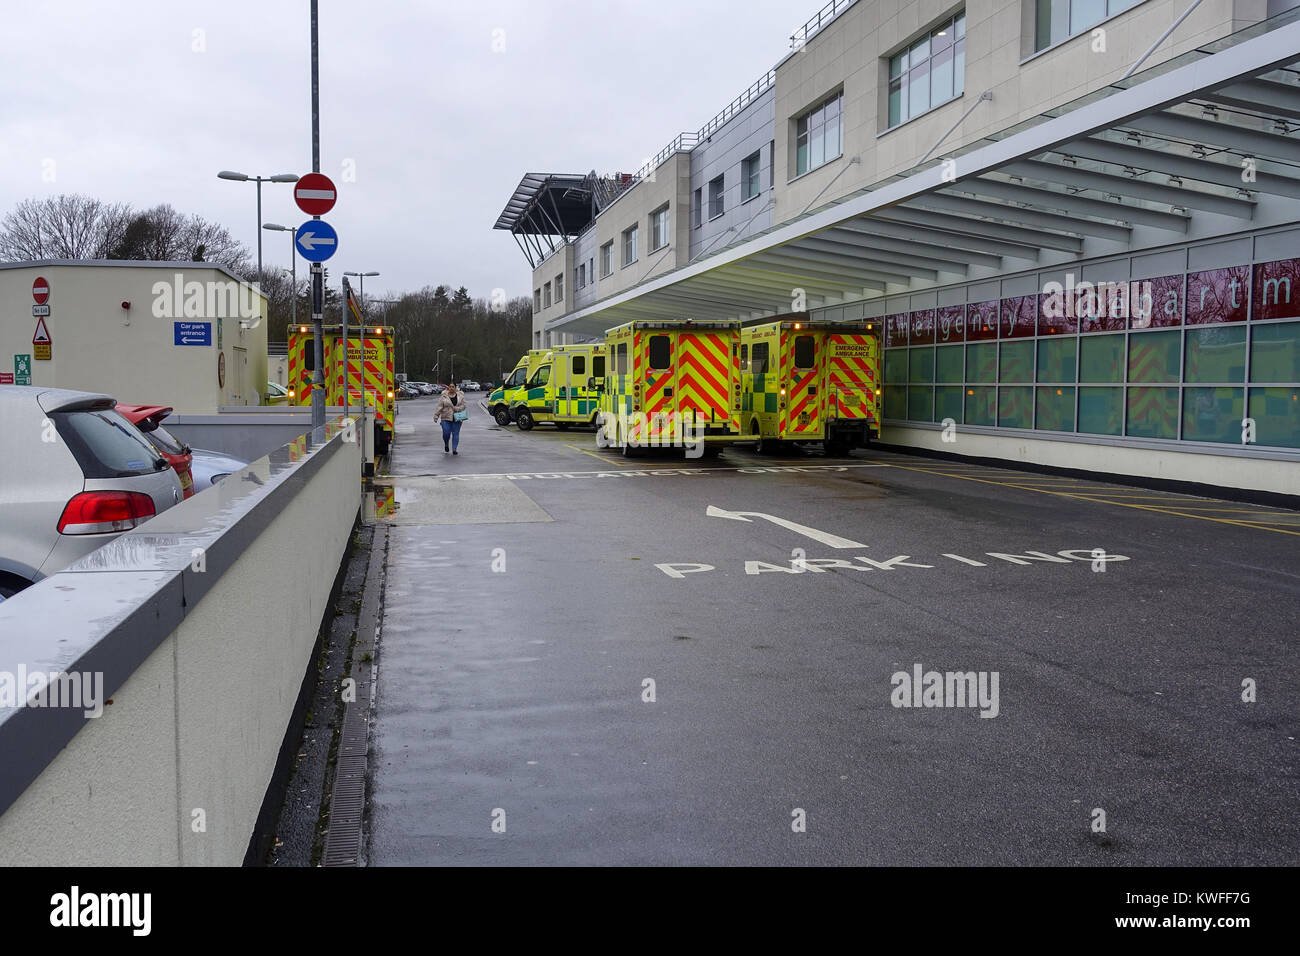 Ambulances Queuing Outside the Emergency Department - Broomfield Hospital, Court Road, Broomfield, Chelmsford, Essex, UK Stock Photo